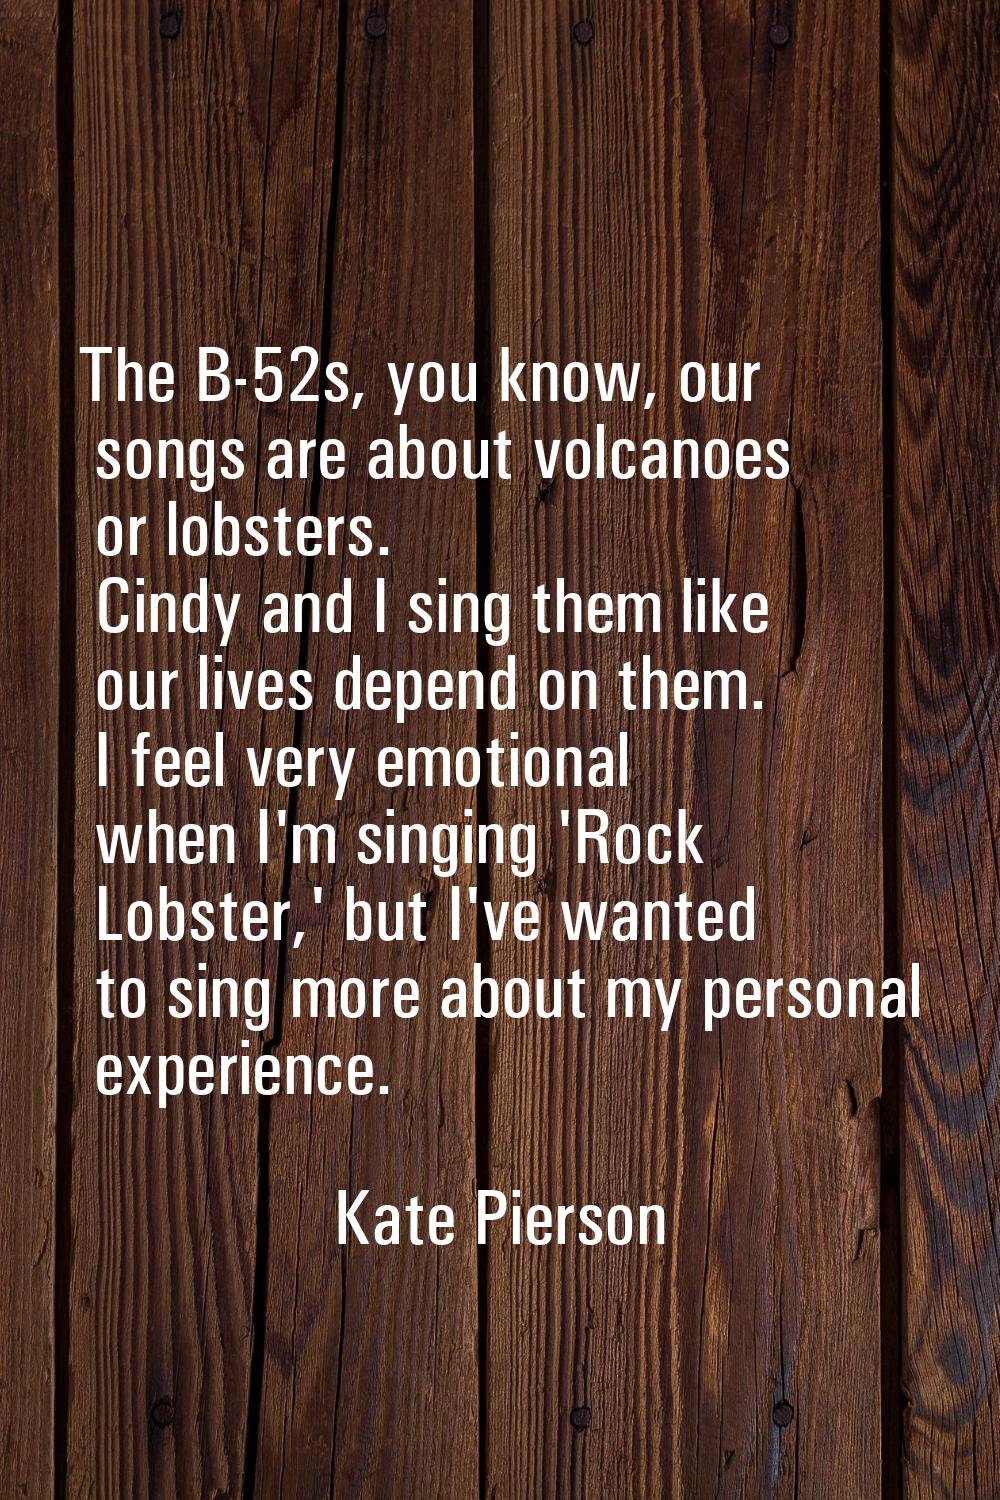 The B-52s, you know, our songs are about volcanoes or lobsters. Cindy and I sing them like our live